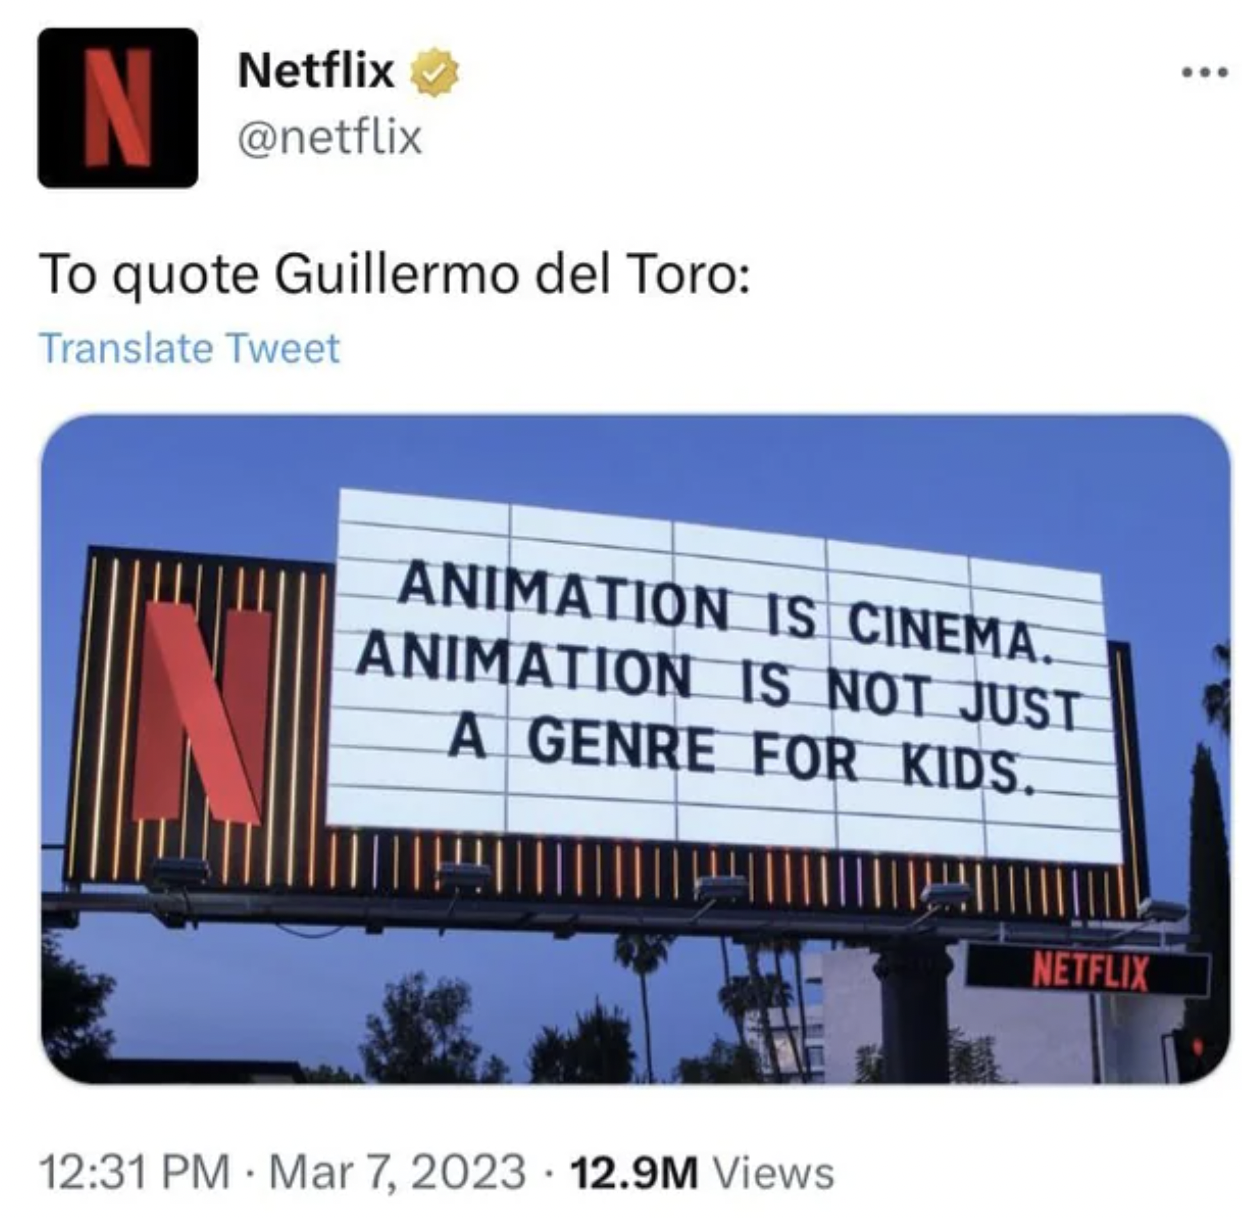 funny fails - display advertising - Netflix To quote Guillermo del Toro Translate Tweet Animation Is Cinema. Animation Is Not Just A Genr